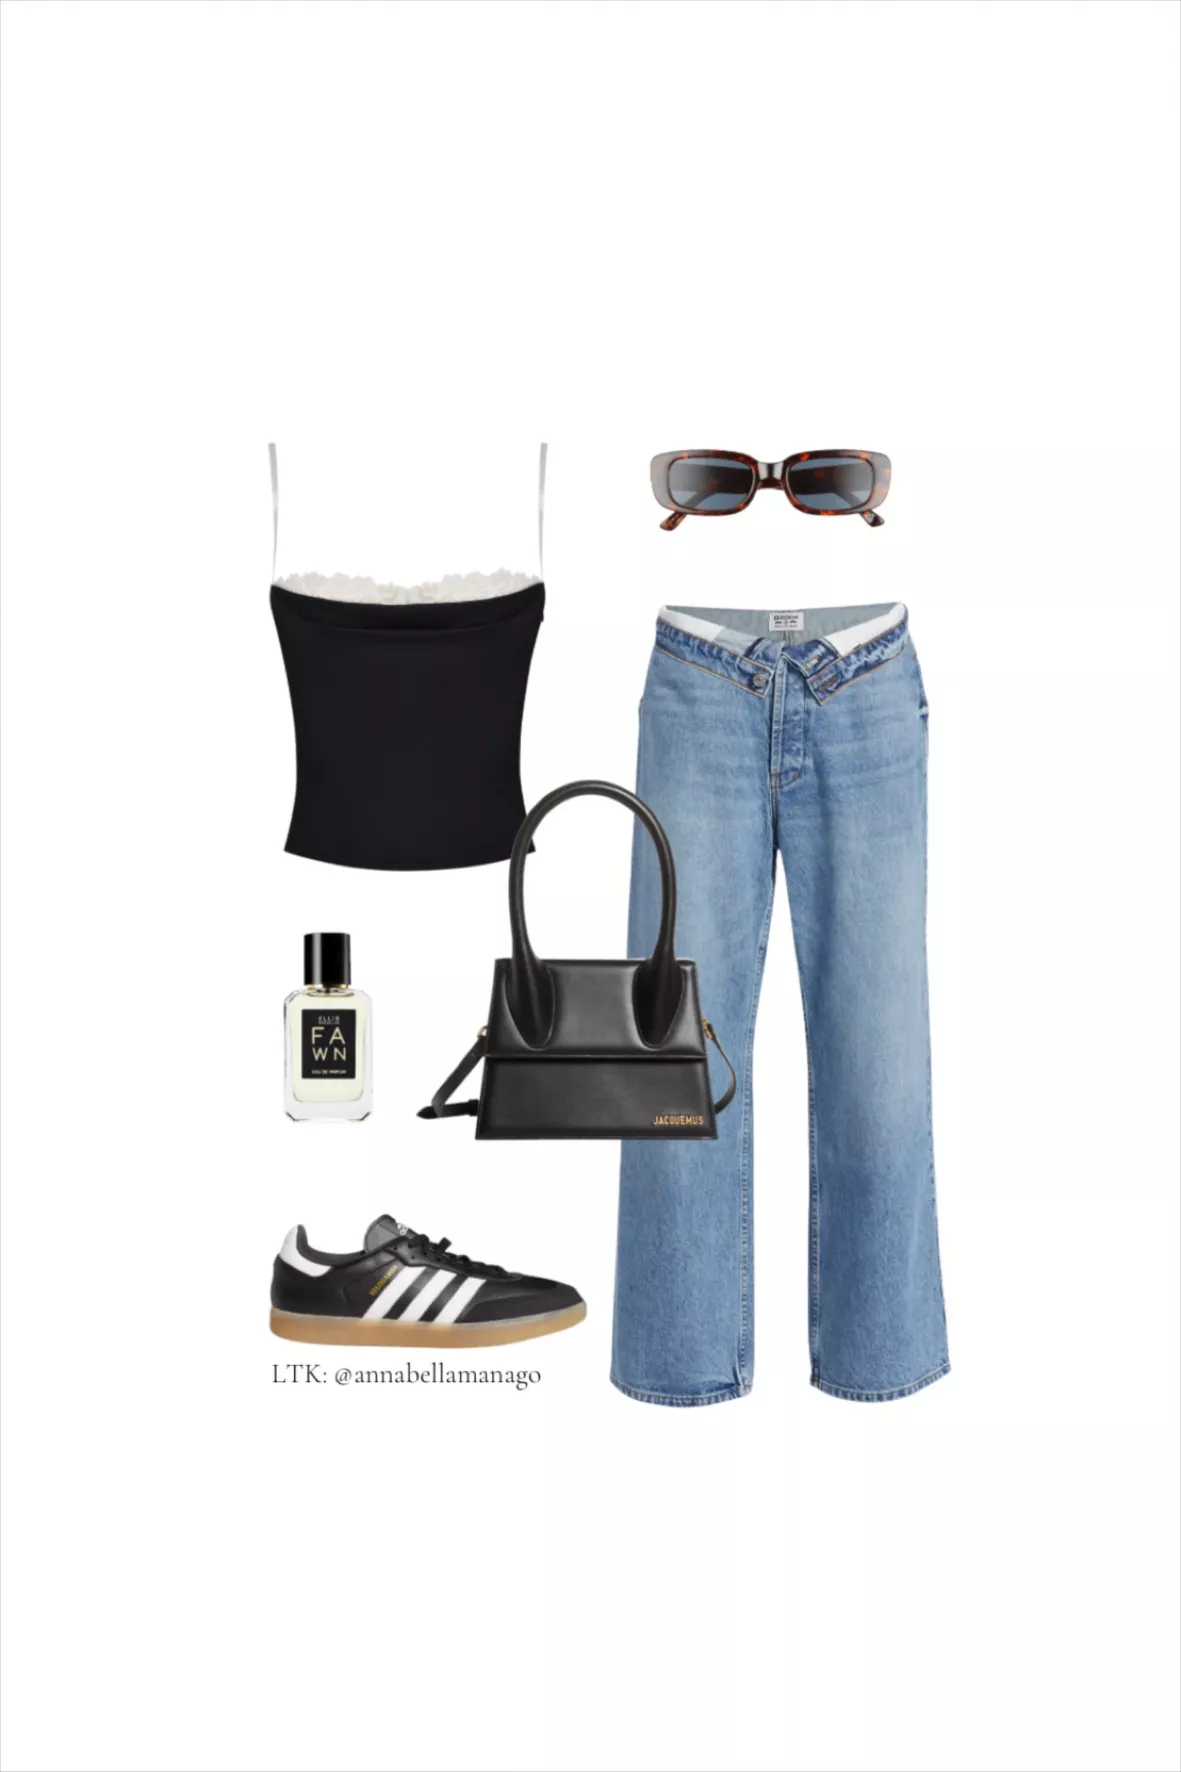 Matilda djerf hair outfit bag  Casual outfits, Stockholm fashion, Fashion